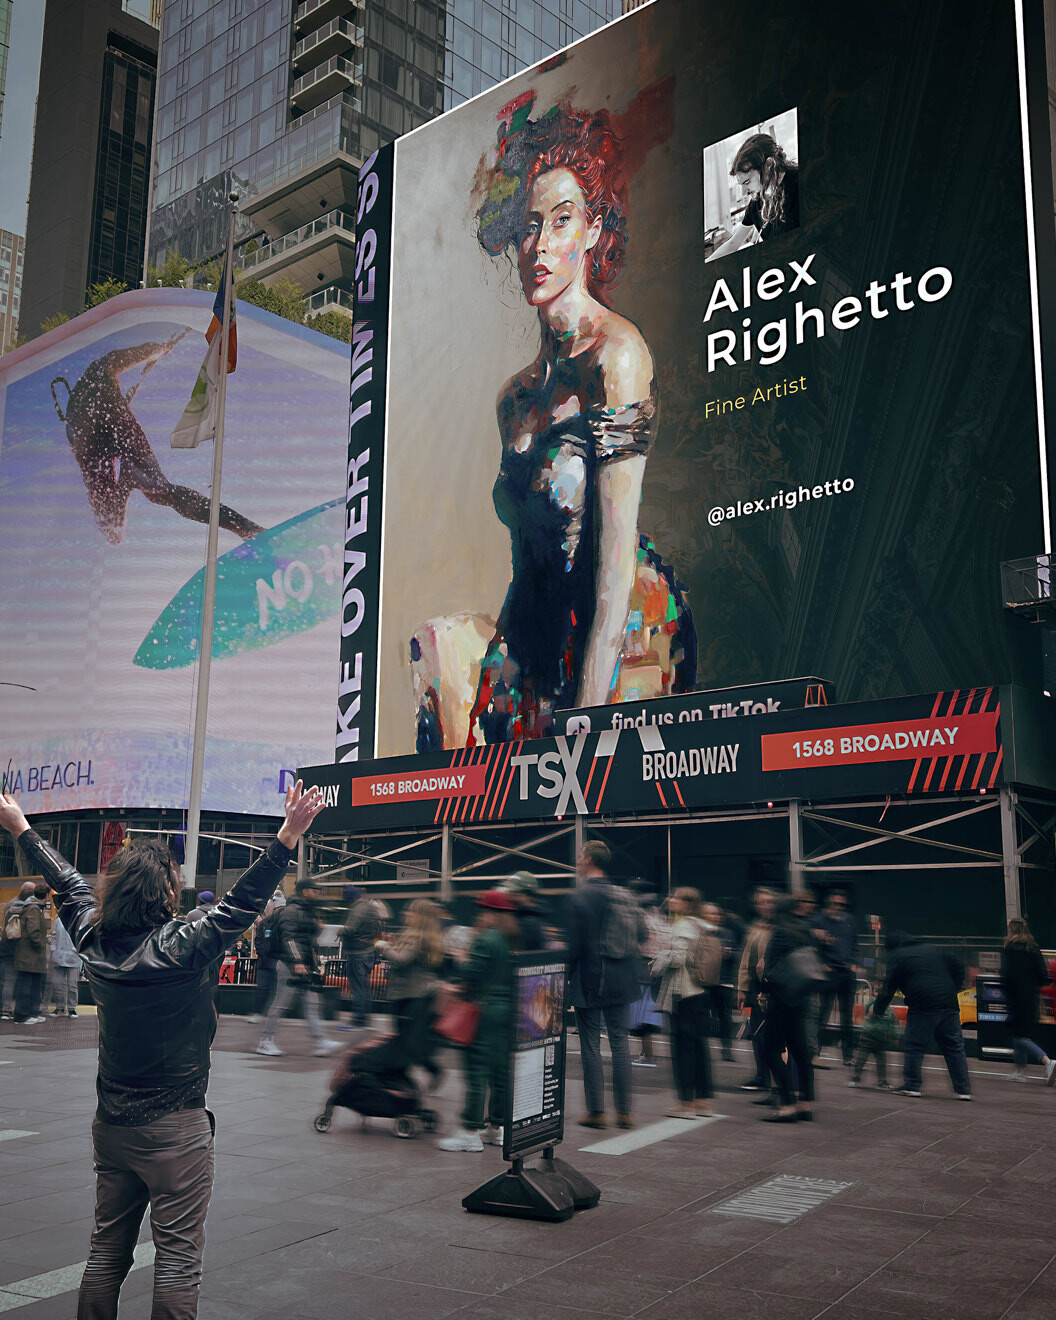 A bustling Times Square with pedestrians and various advertisements. In the foreground, an individual is seen taking a selfie with a large billboard featuring a modern, expressive portrait of Mona Lisa's Daughter